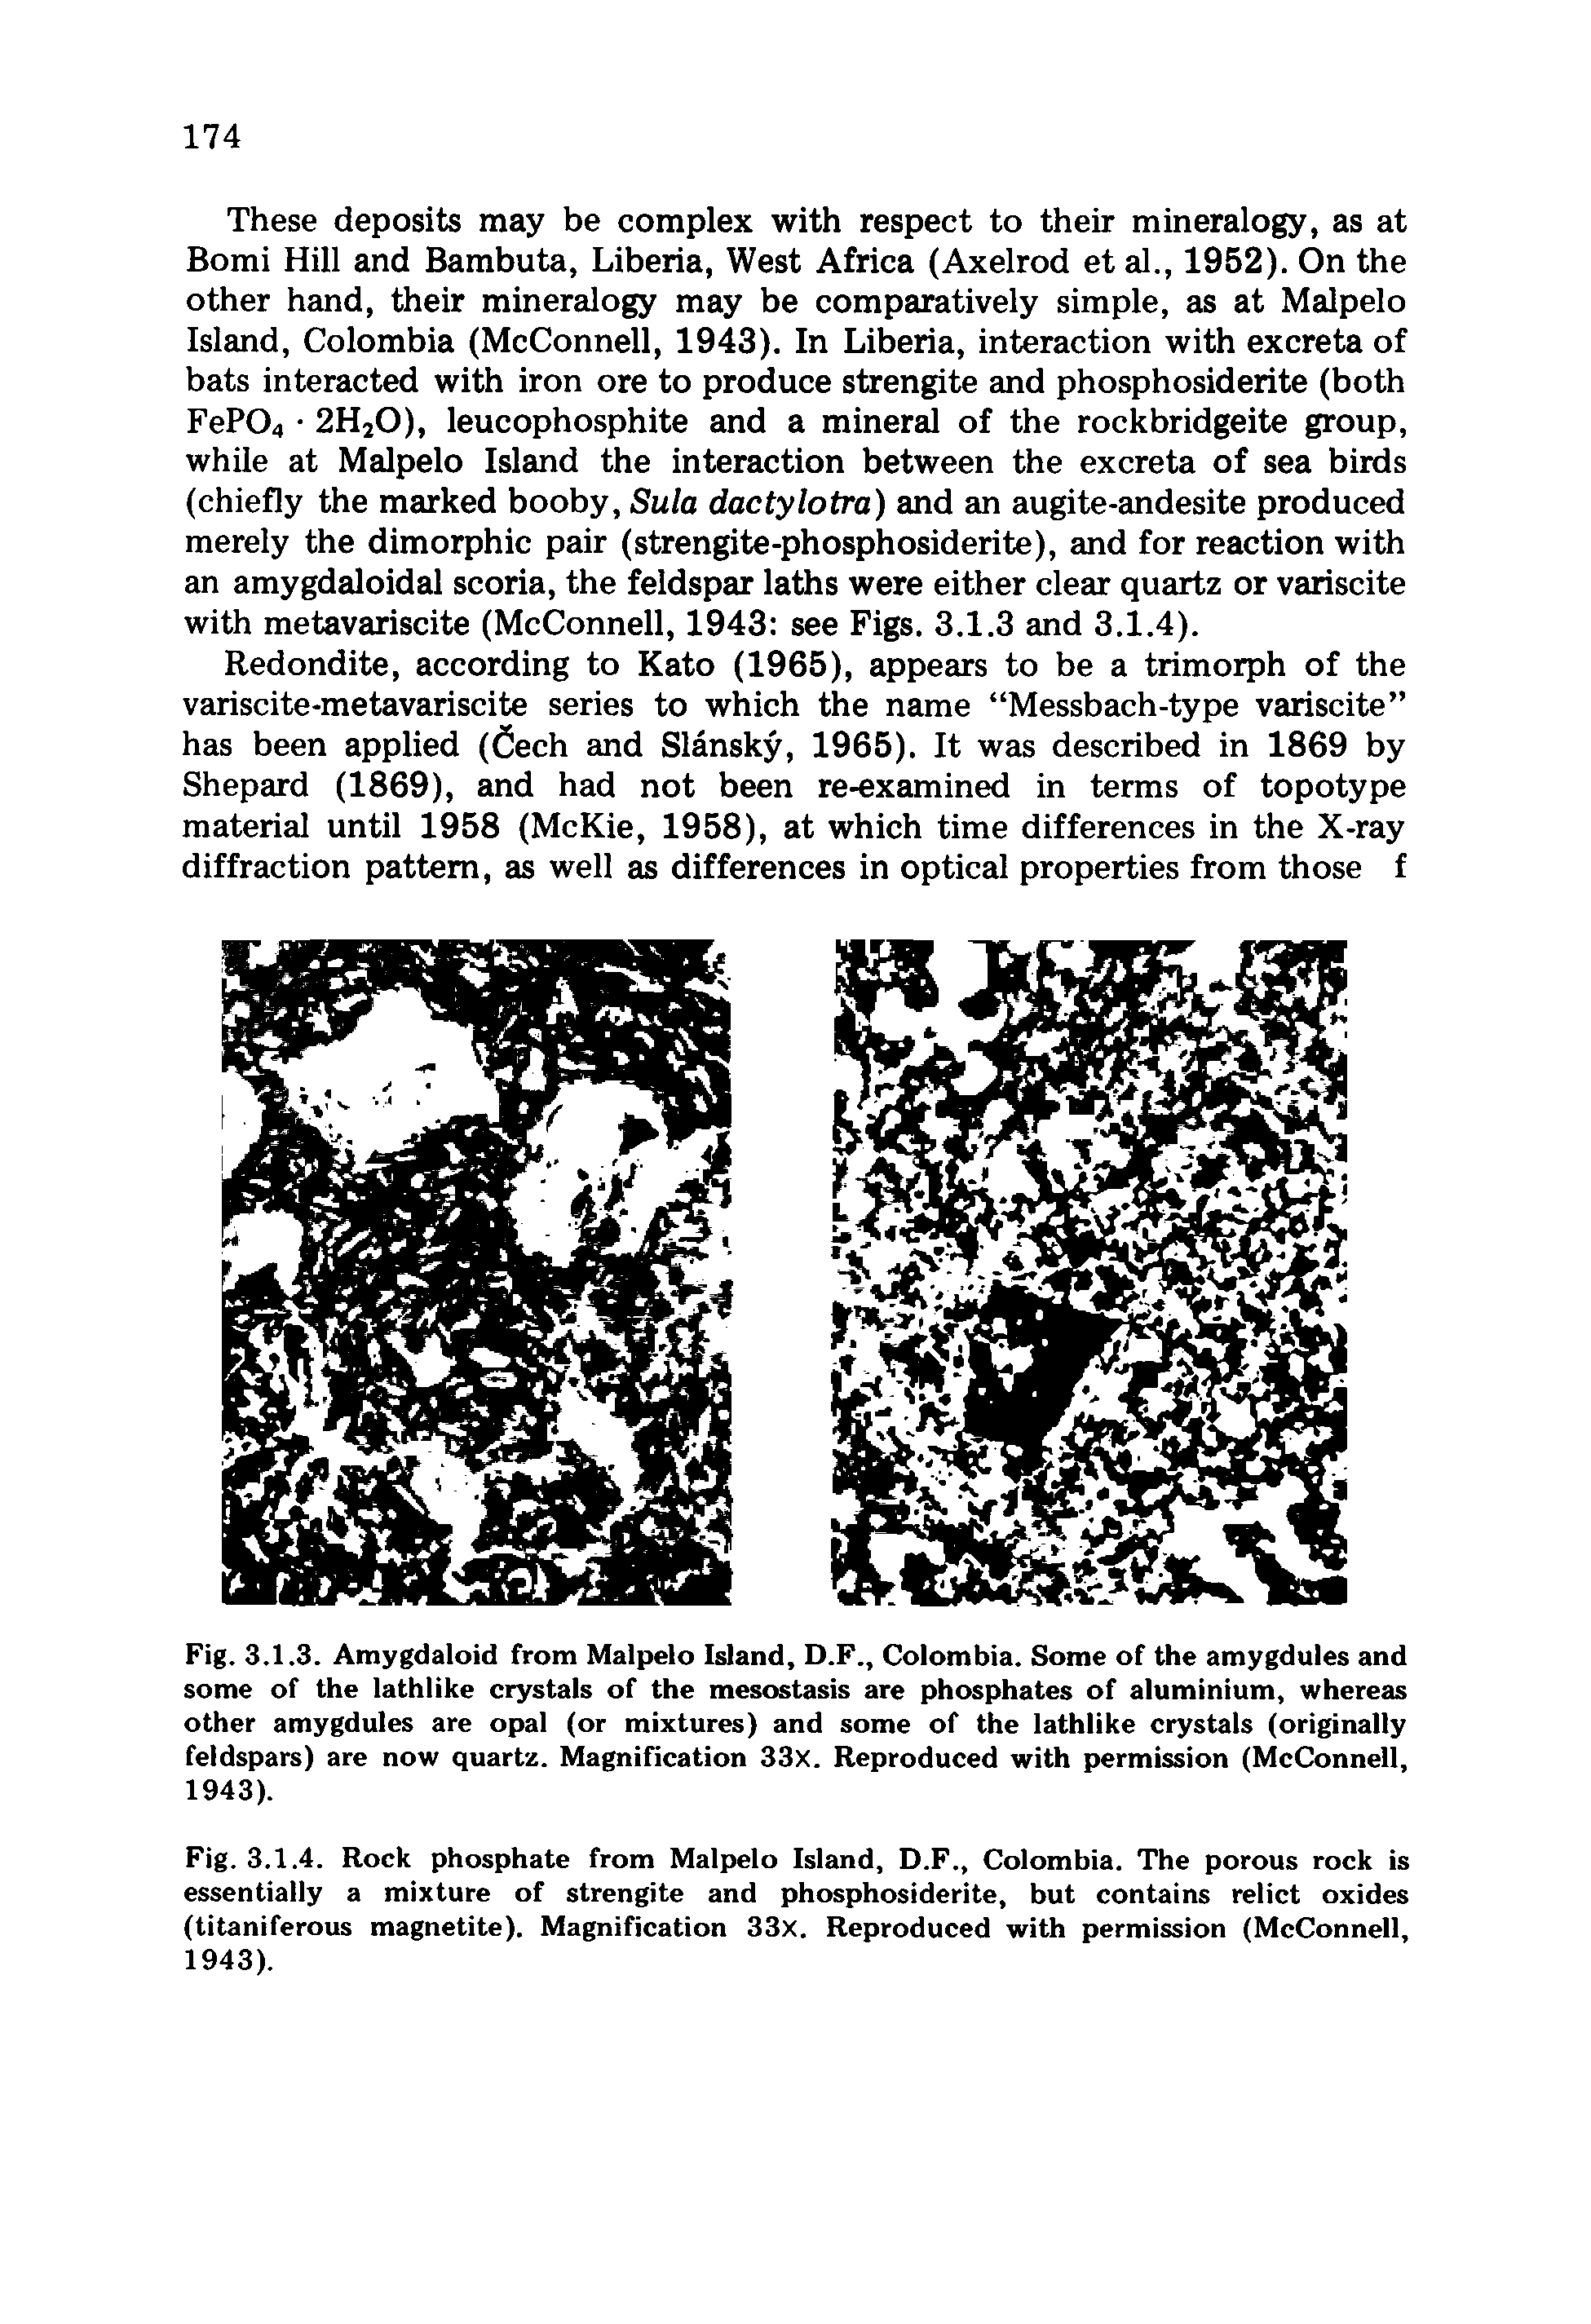 Fig. 3.1.4. Rock phosphate from Malpelo Island, D.F., Colombia. The porous rock is essentially a mixture of strengite and phosphosiderite, but contains relict oxides (titaniferous magnetite). Magnification 33x. Reproduced with permission (McConnell, 1943).